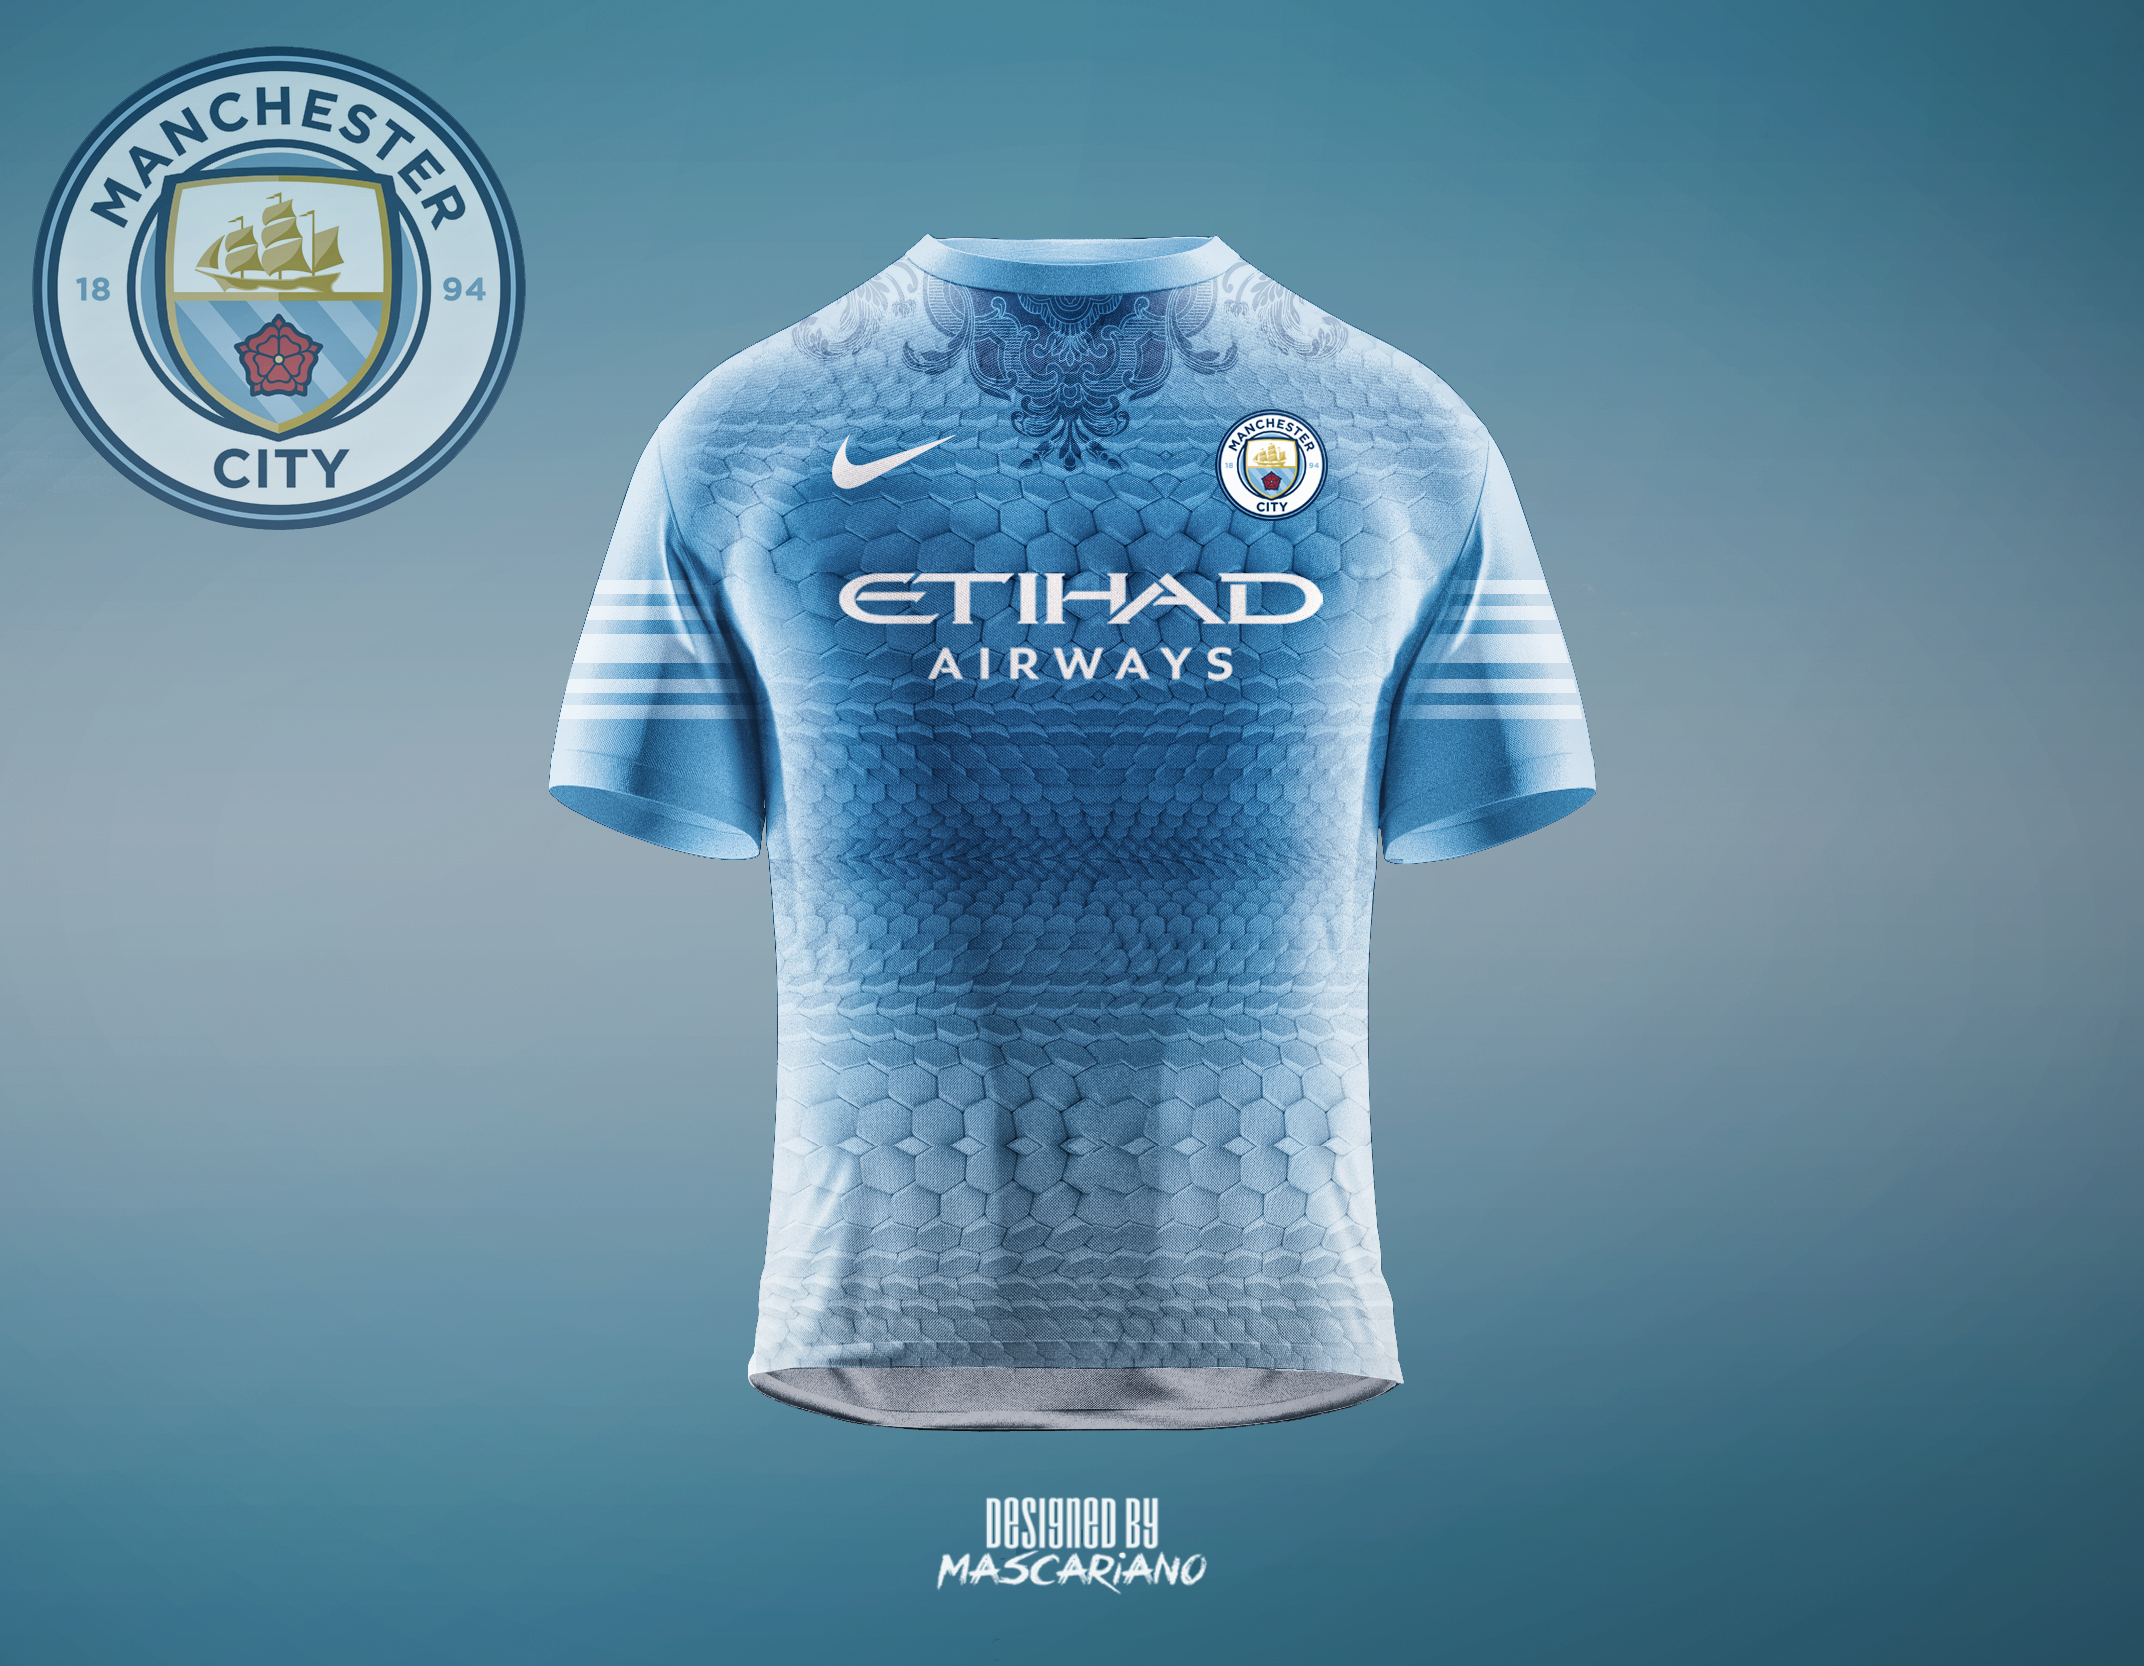 Manchester City 2018/2019 (Concept Kit) by Mascariano on DeviantArt